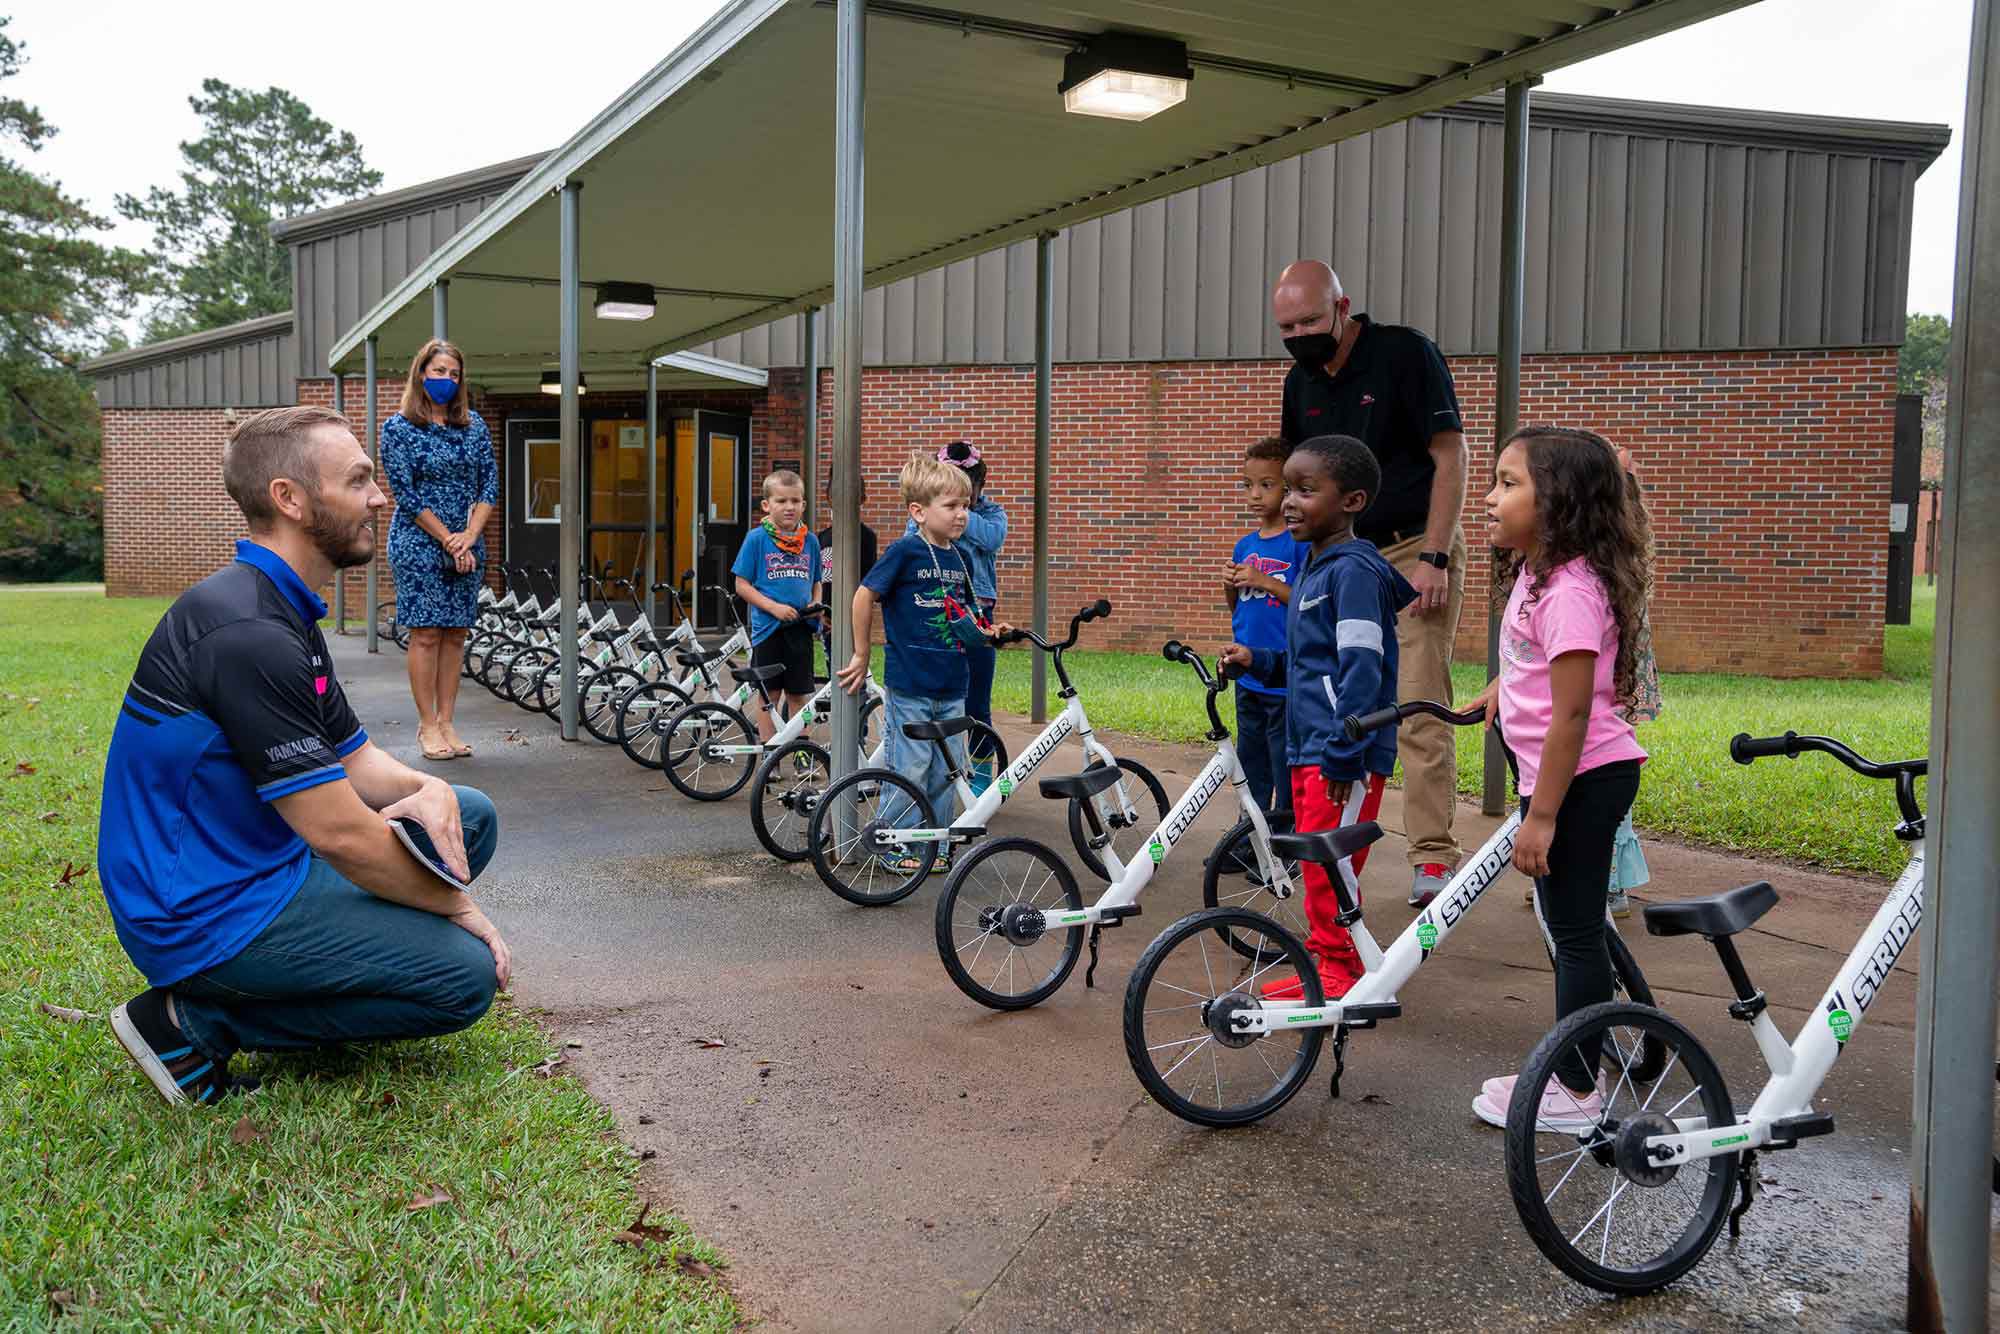 The All Kids Bike program teaches kindergarteners how to ride a bicycle, encouraging balance, confidence, mobility, and physical activity.